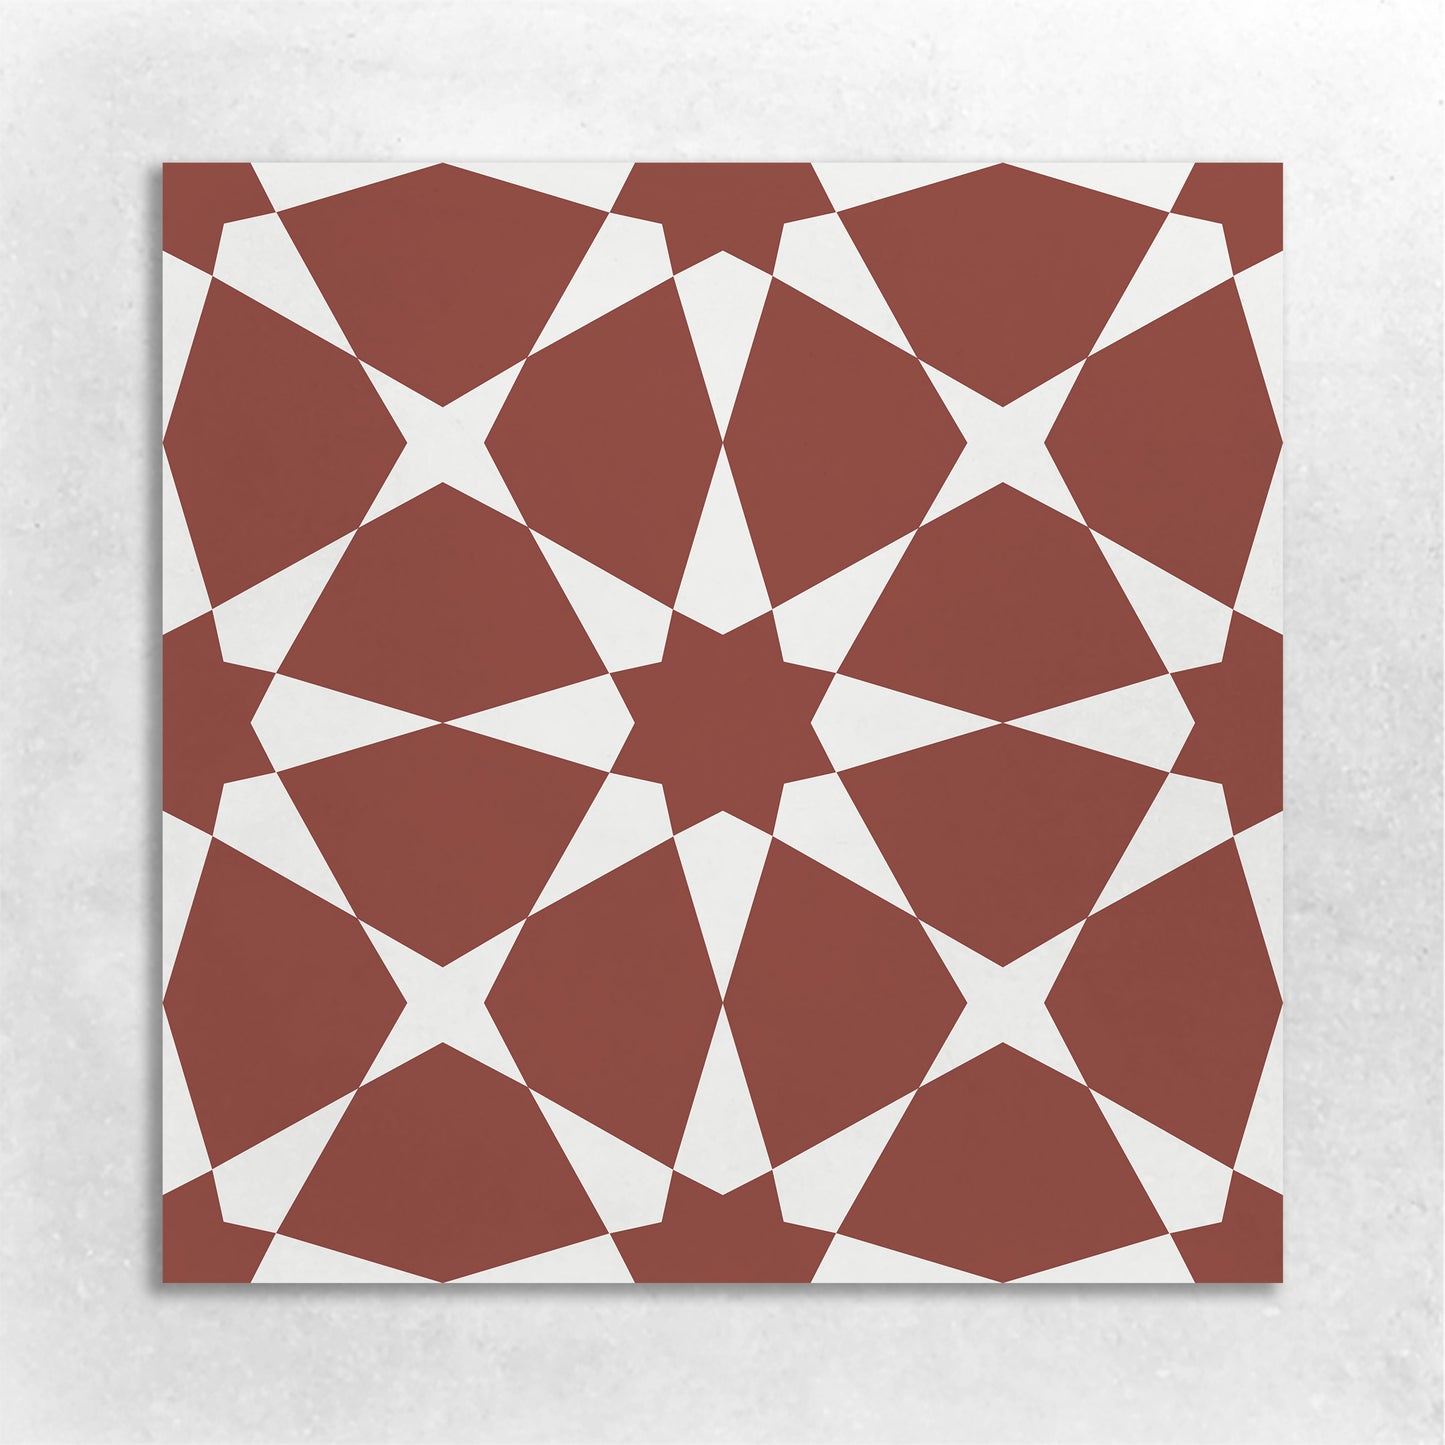 8x8 cement tile with a Moroccan star pattern in red and white colors